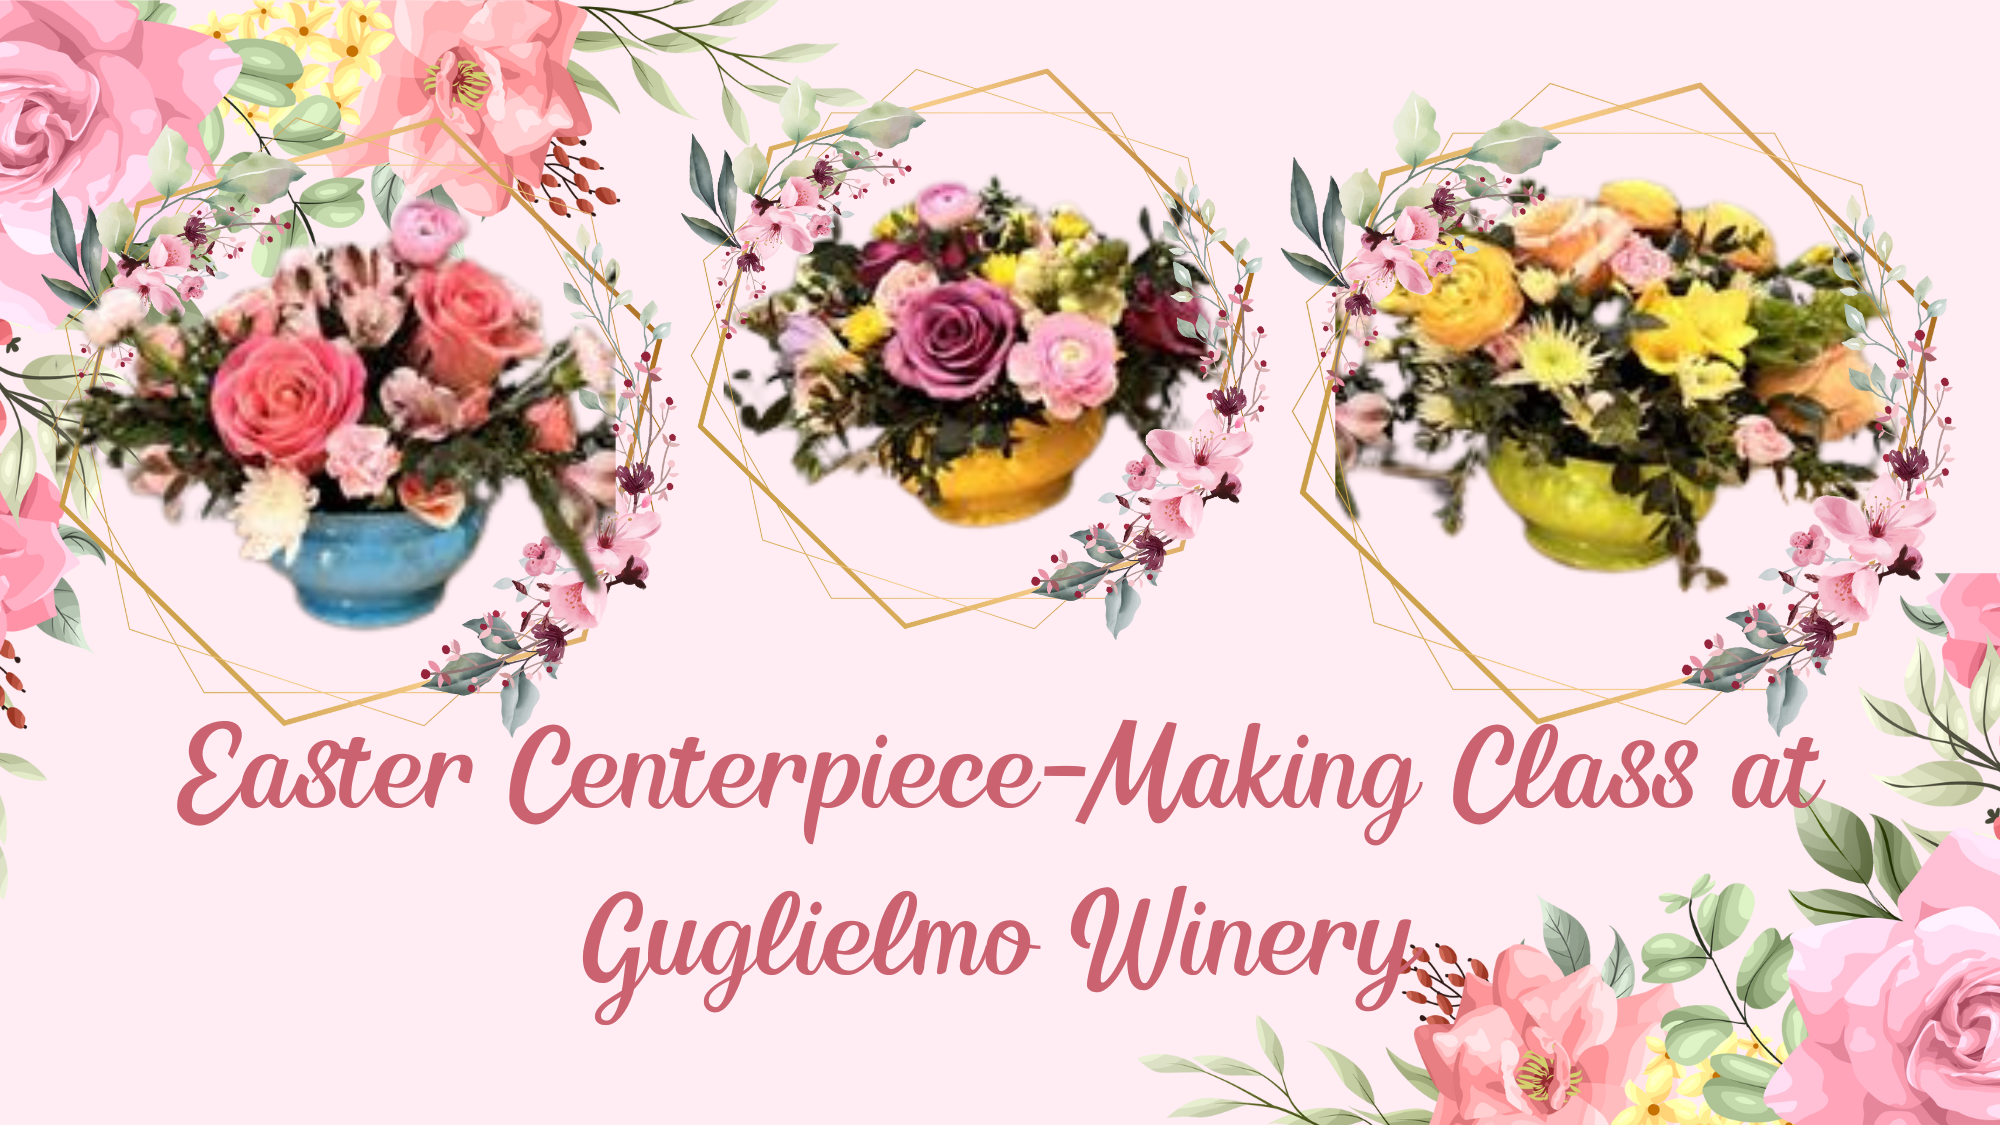 Easter-Centerpiece-Making-Class-at-Guglielmo-Winery